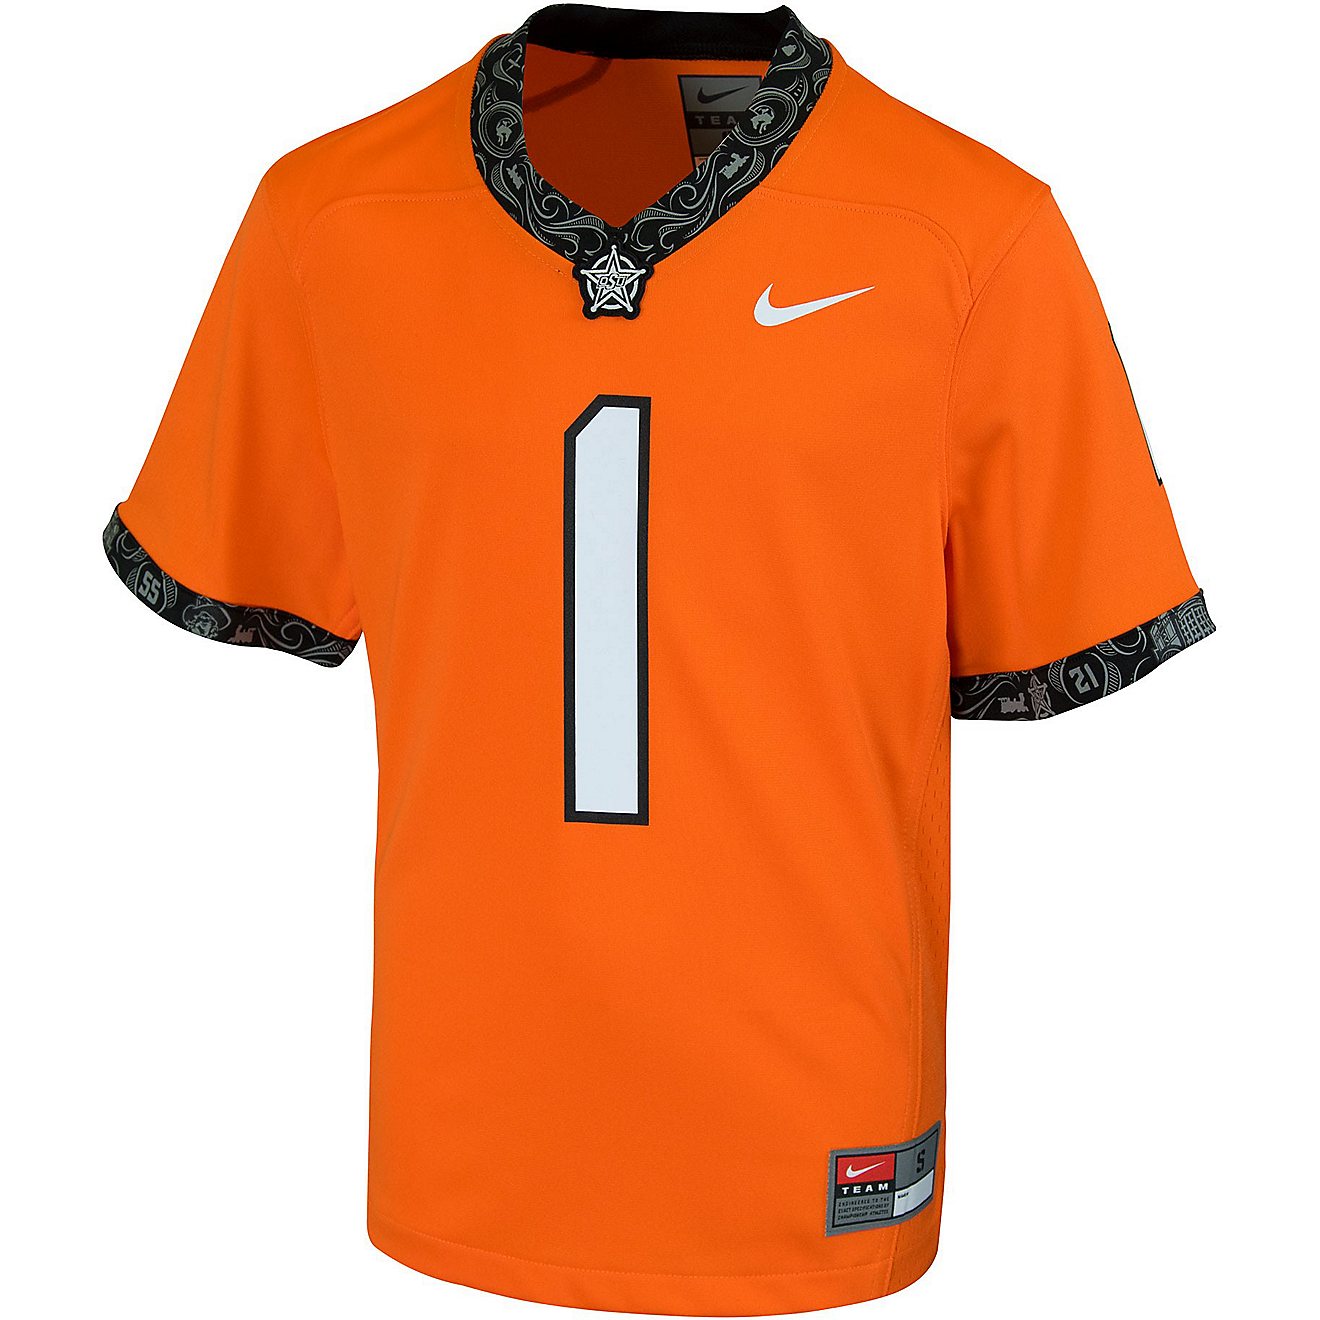 Nike Boys' Oklahoma State University Untouchable Replica Football Jersey                                                         - view number 1